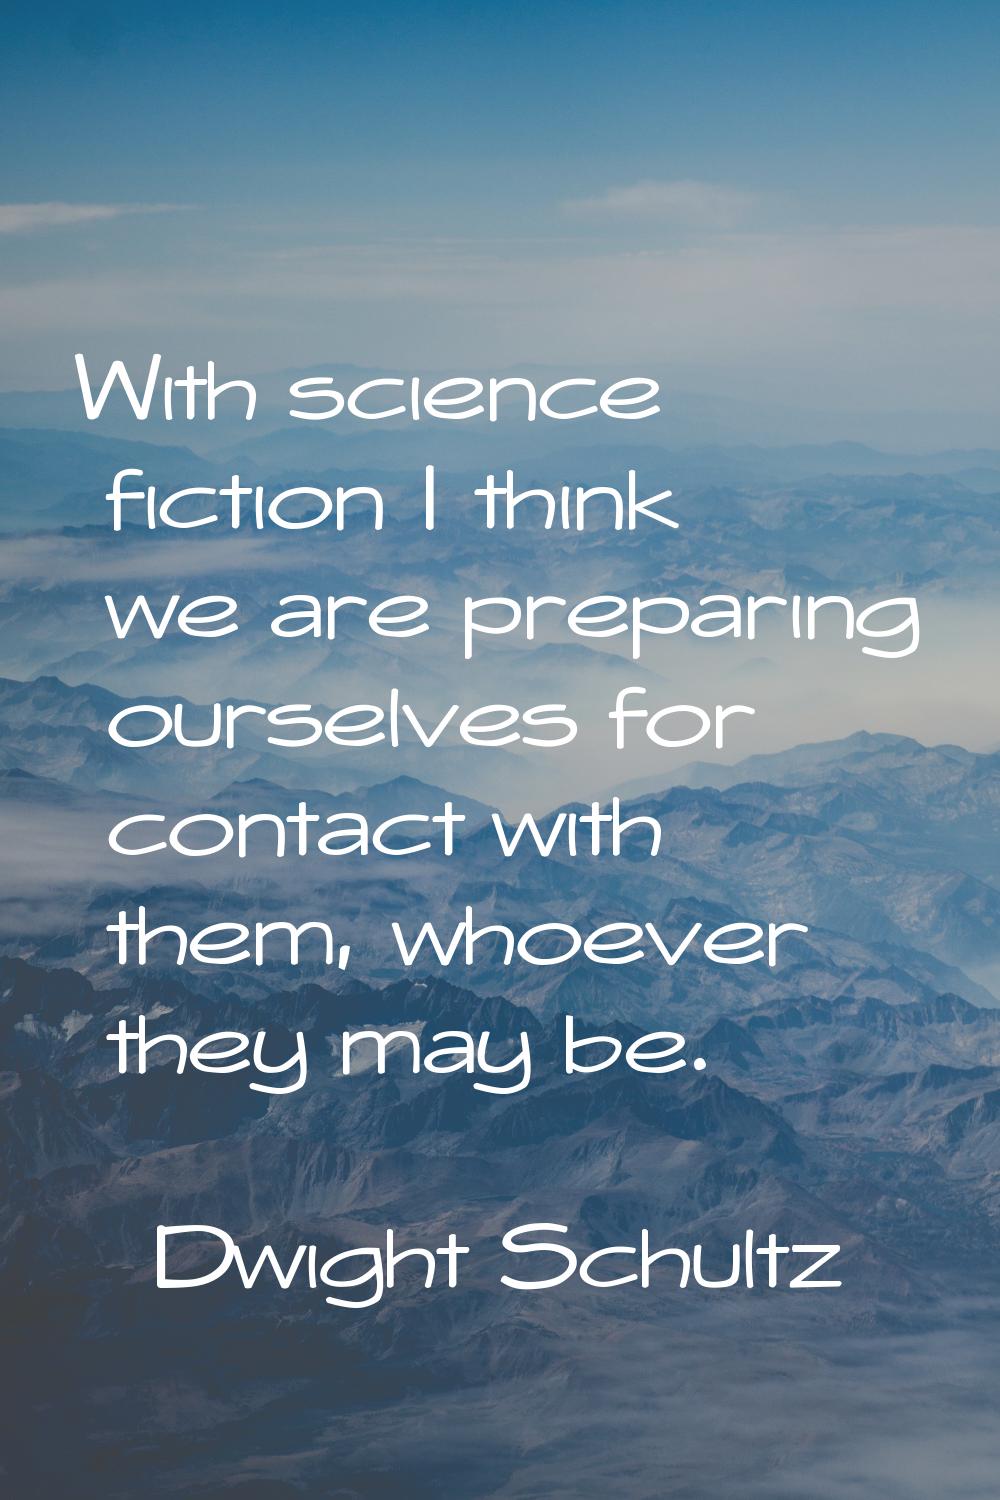 With science fiction I think we are preparing ourselves for contact with them, whoever they may be.